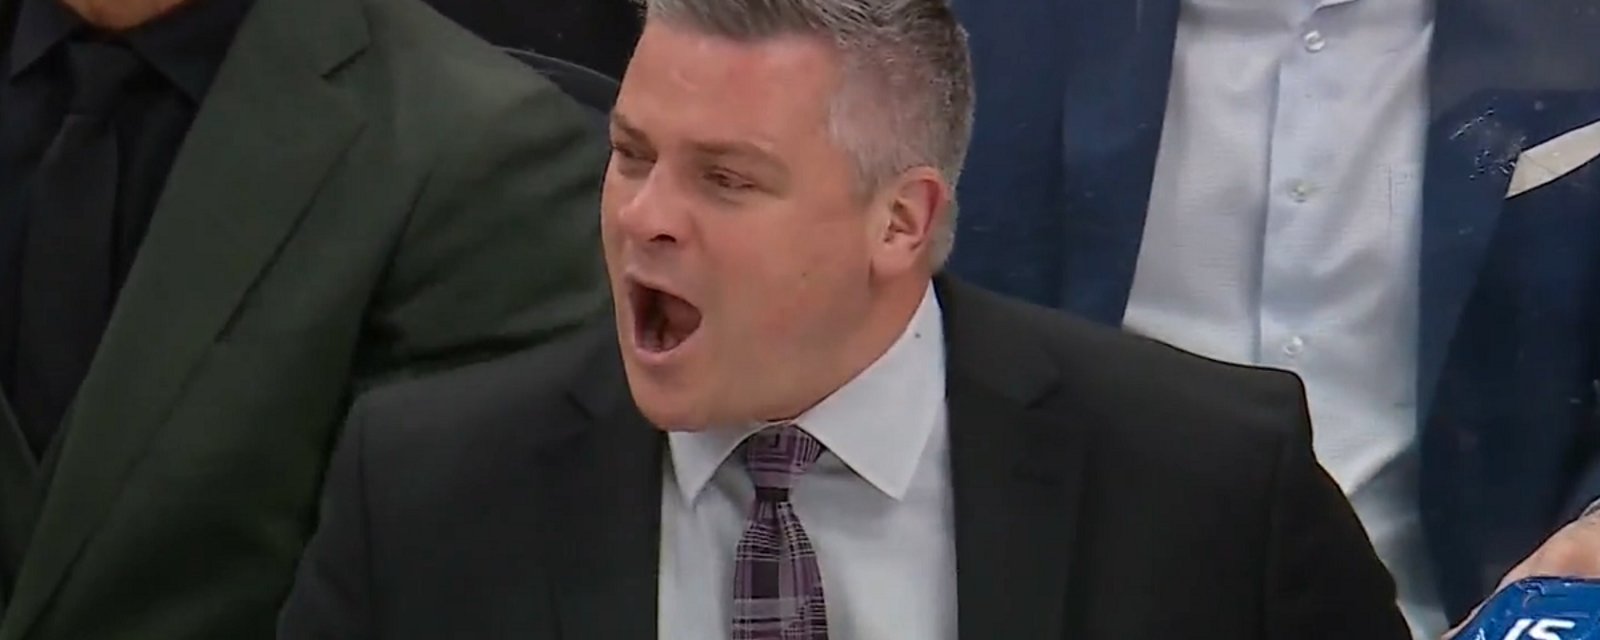 Sheldon Keefe slams his players over the Liljegren/Marchand incident.